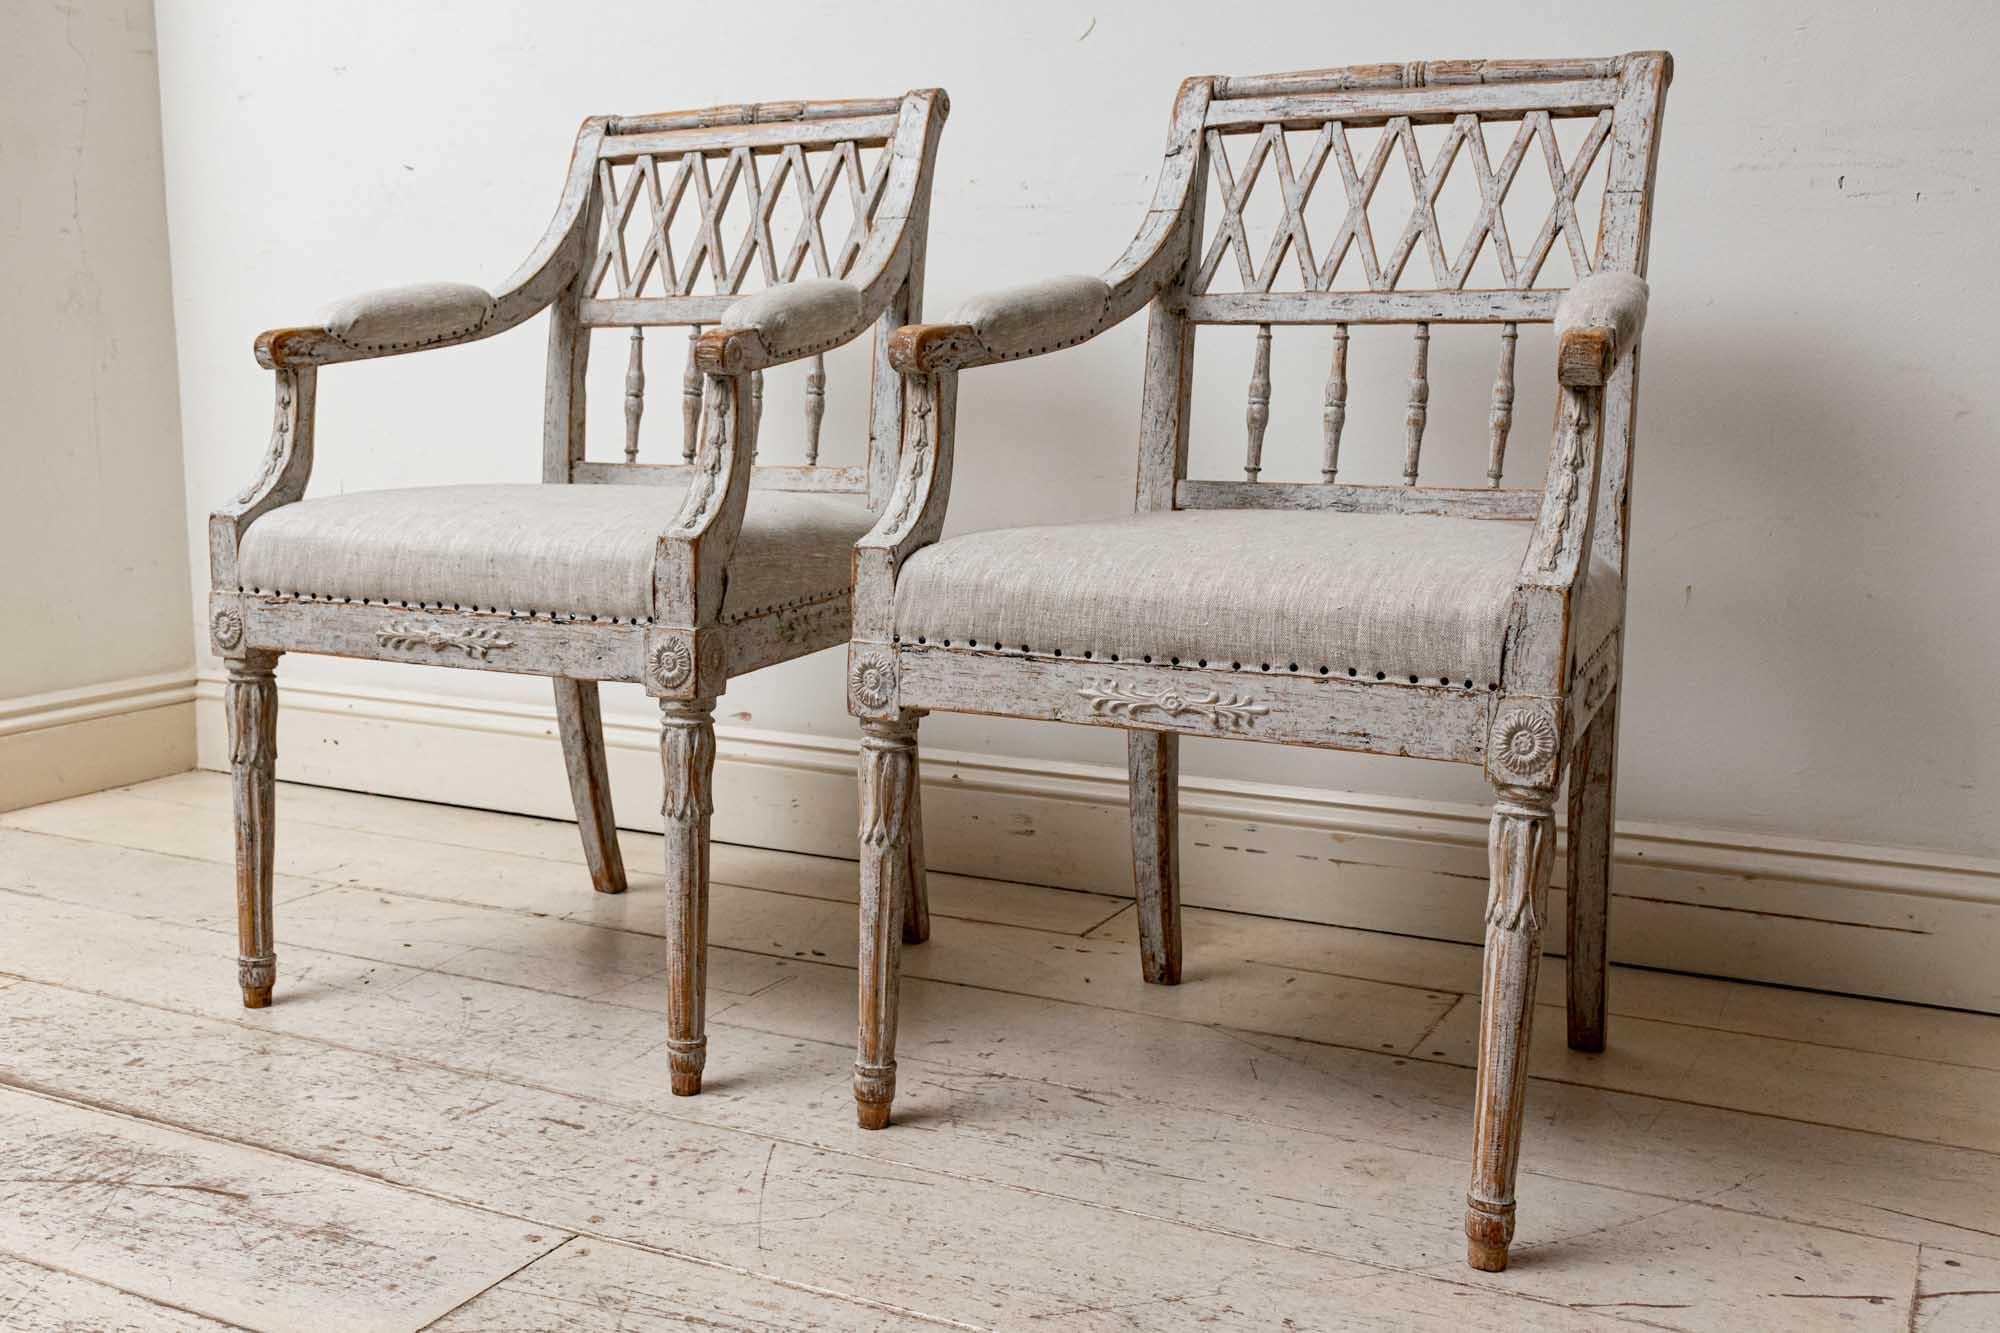 Gustavian 19th Century Pair of Painted Swedish Lattice Back Chairs with Spindle Supports